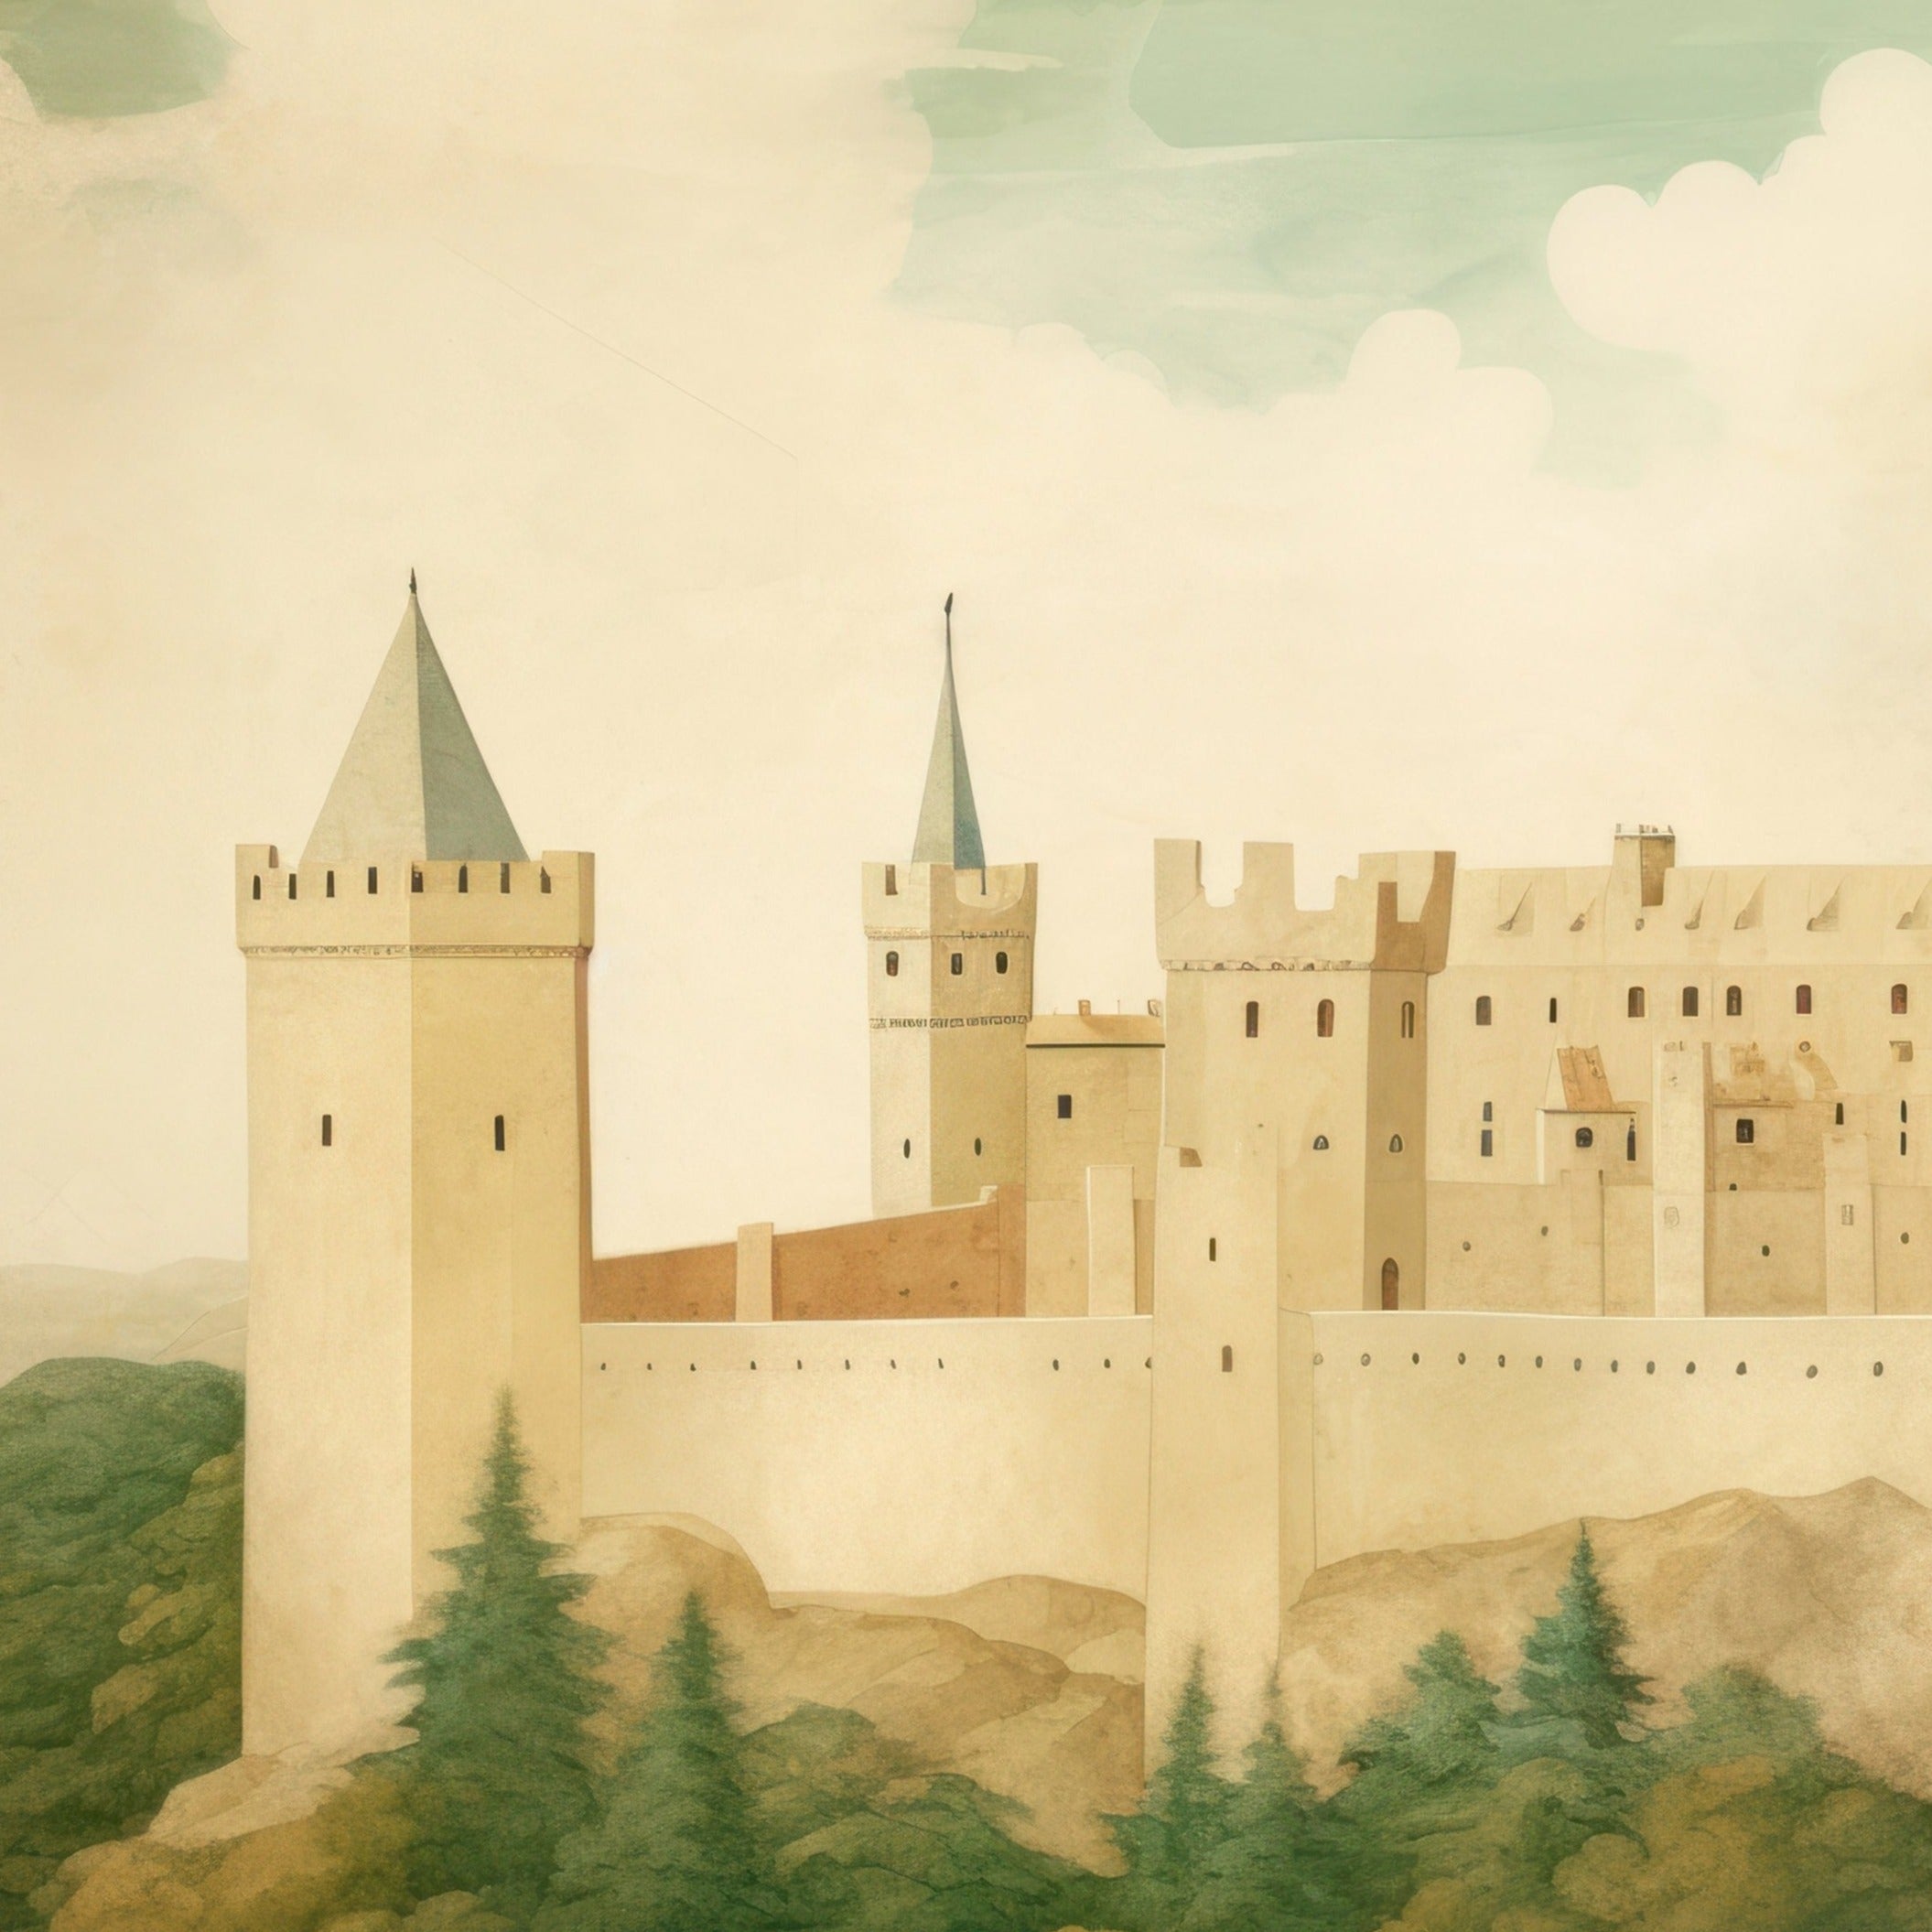 Children's room featuring 'DunBroch's Castle Mural' depicting a large medieval castle set against rolling hills and a cloudy sky."